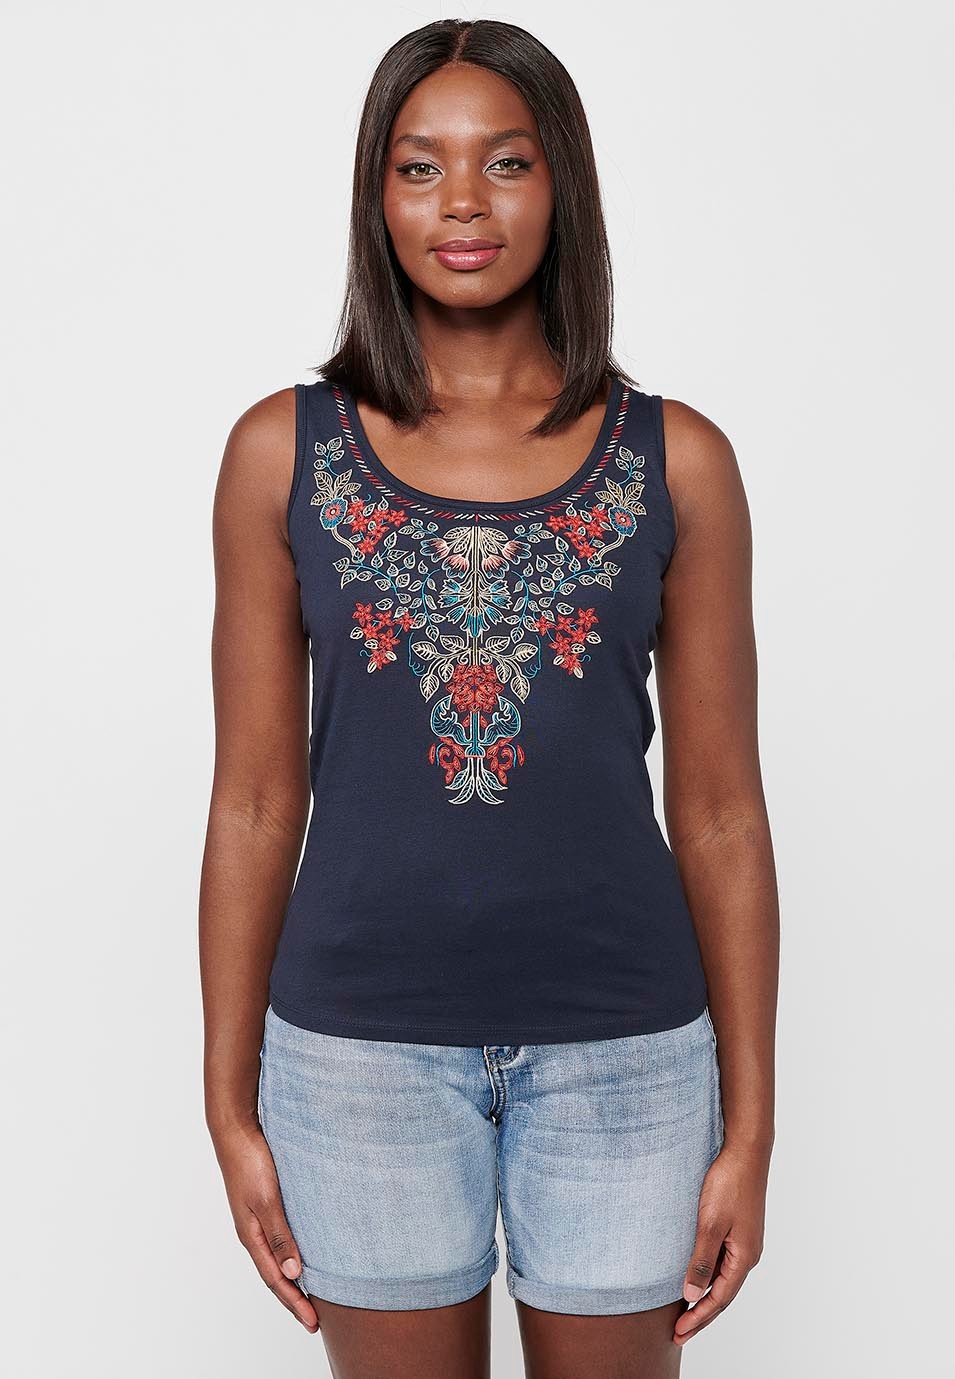 Sleeveless T-shirt, round neckline and front embroidery, black color for women